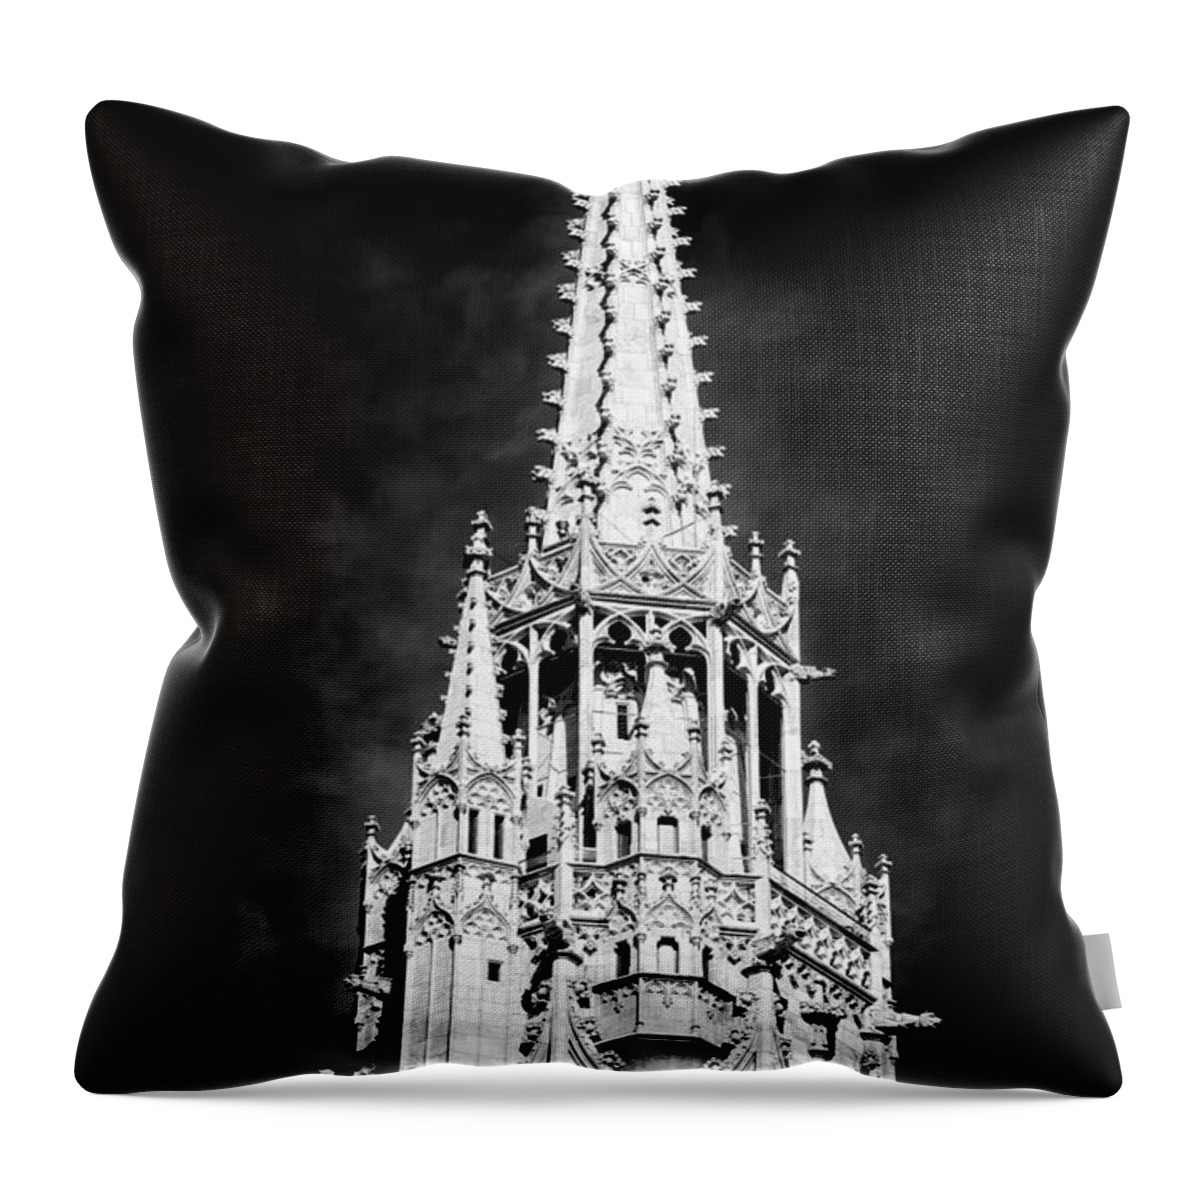 Steeple Throw Pillow featuring the photograph Steeple Matthias Church Budapest black and white by Matthias Hauser